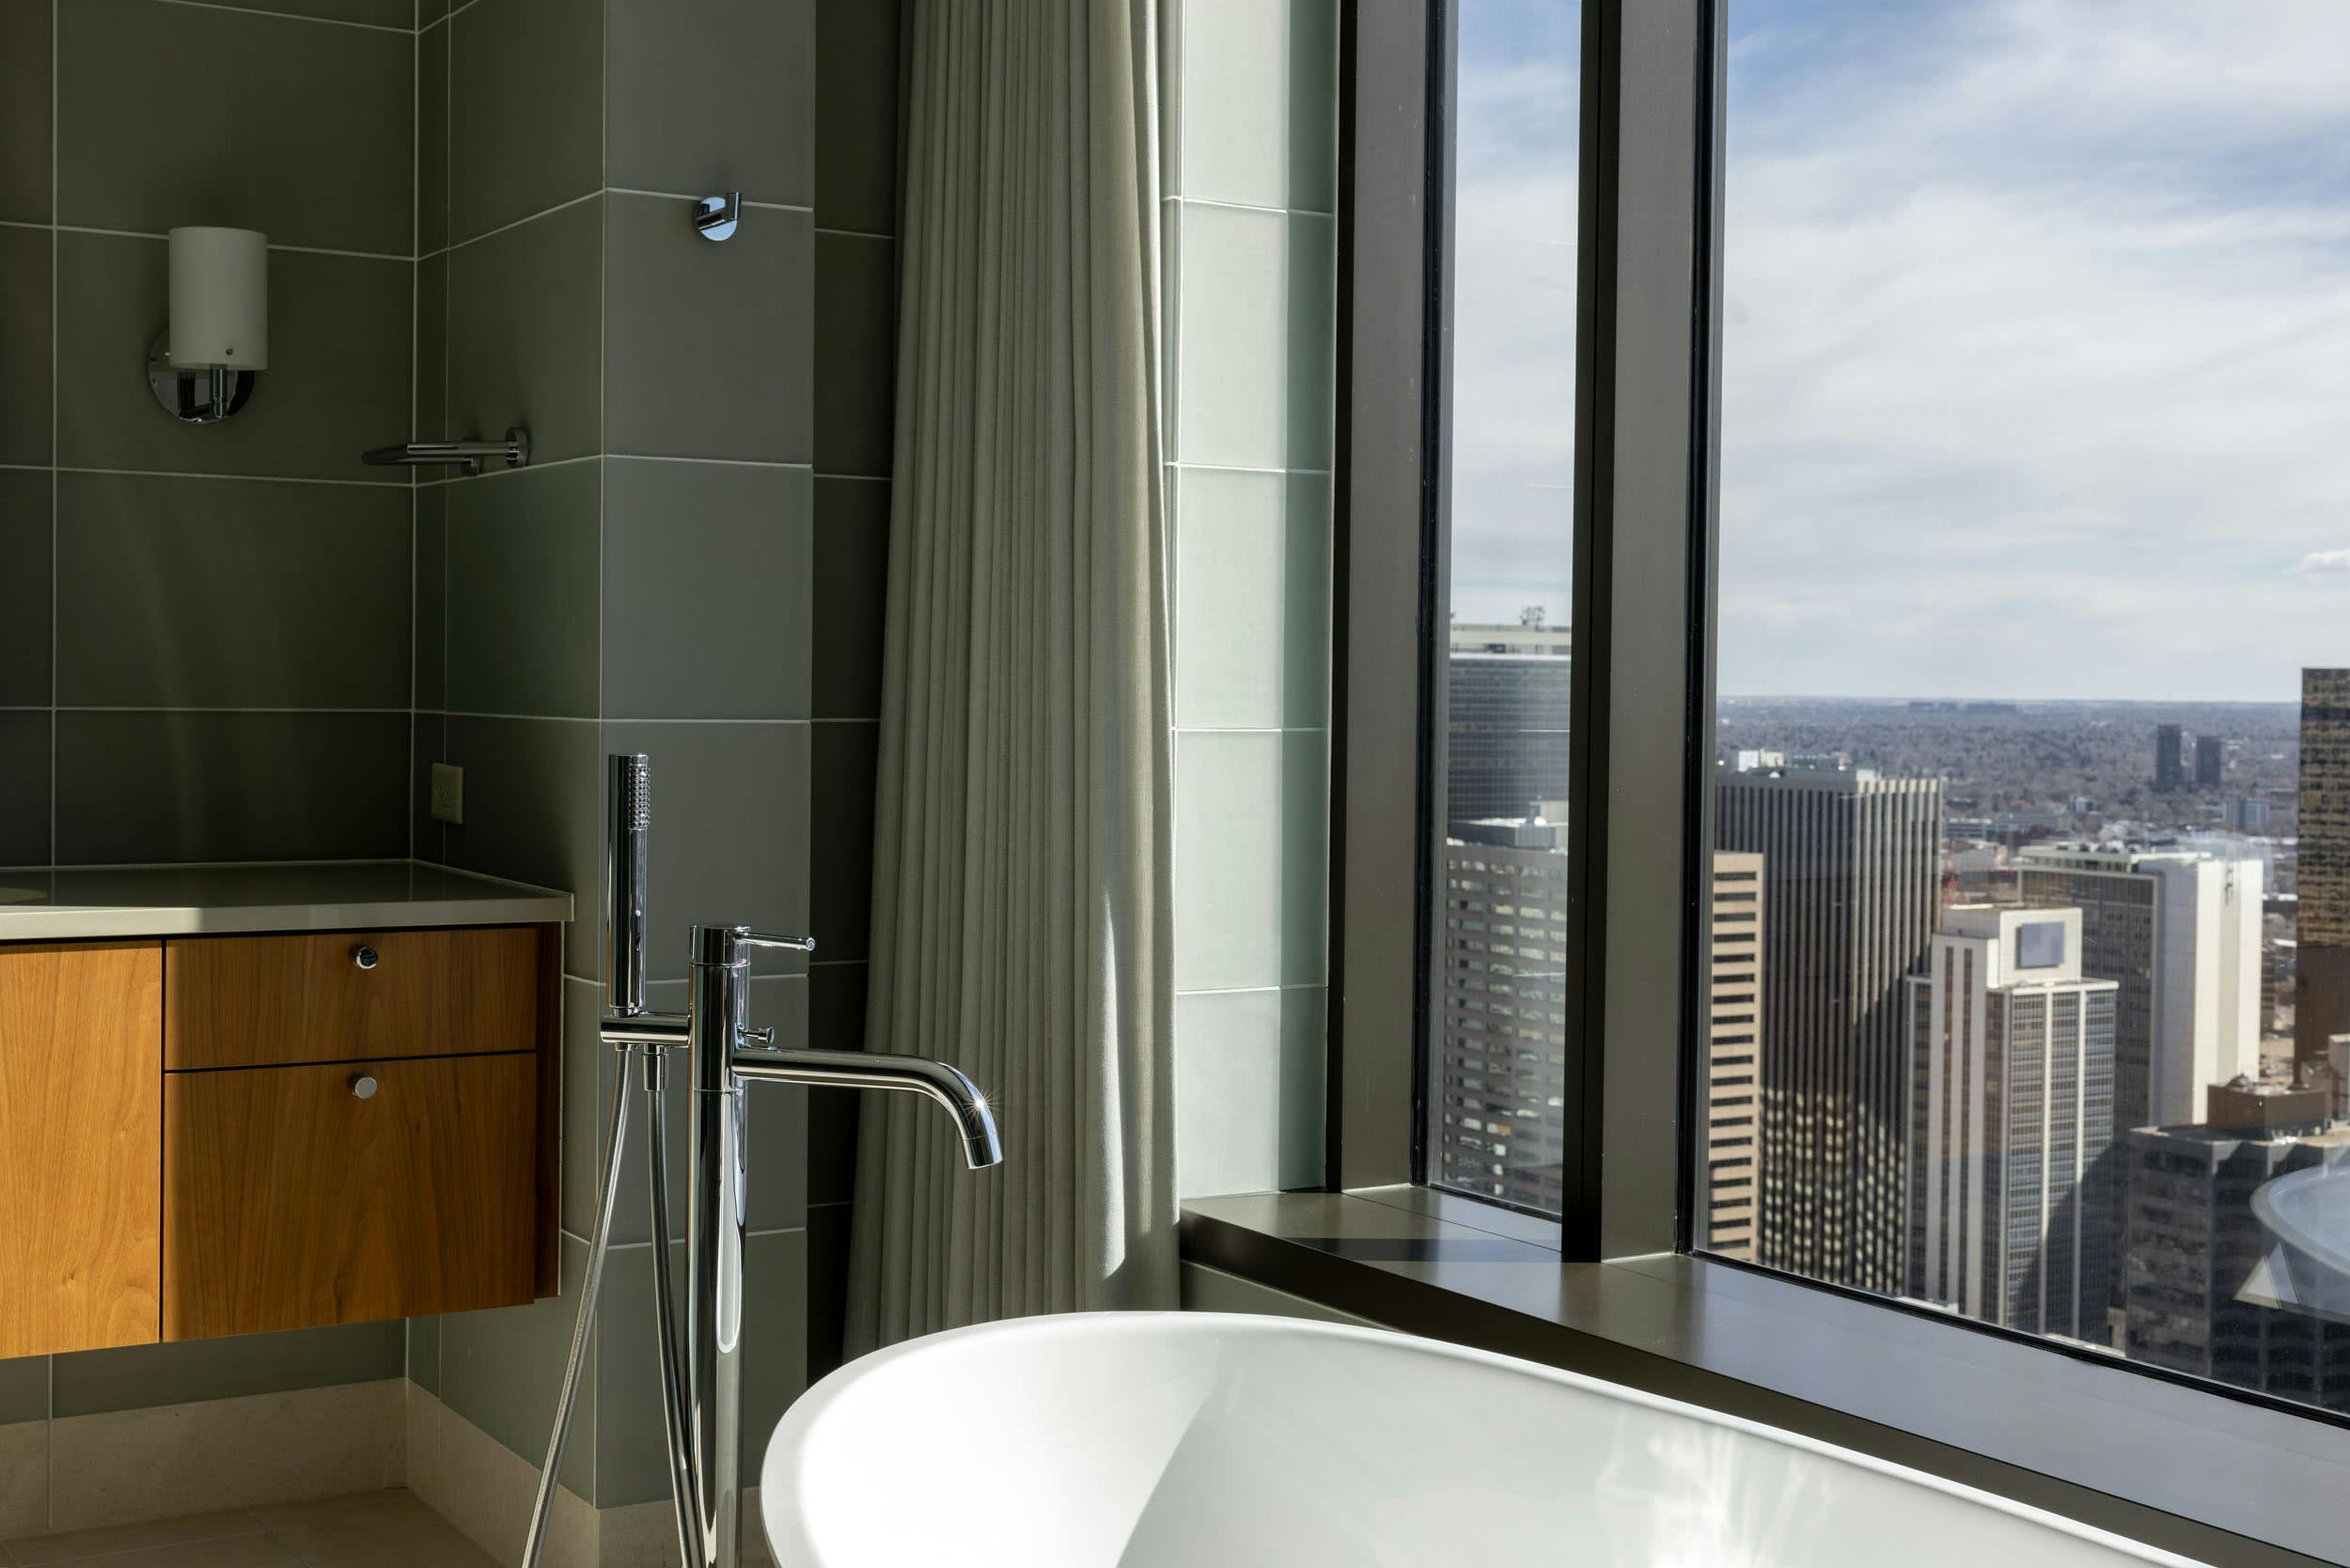 a bathroom with a tub, sink and large window overlooking a cityscape in the foreground, and a cityscape in the background